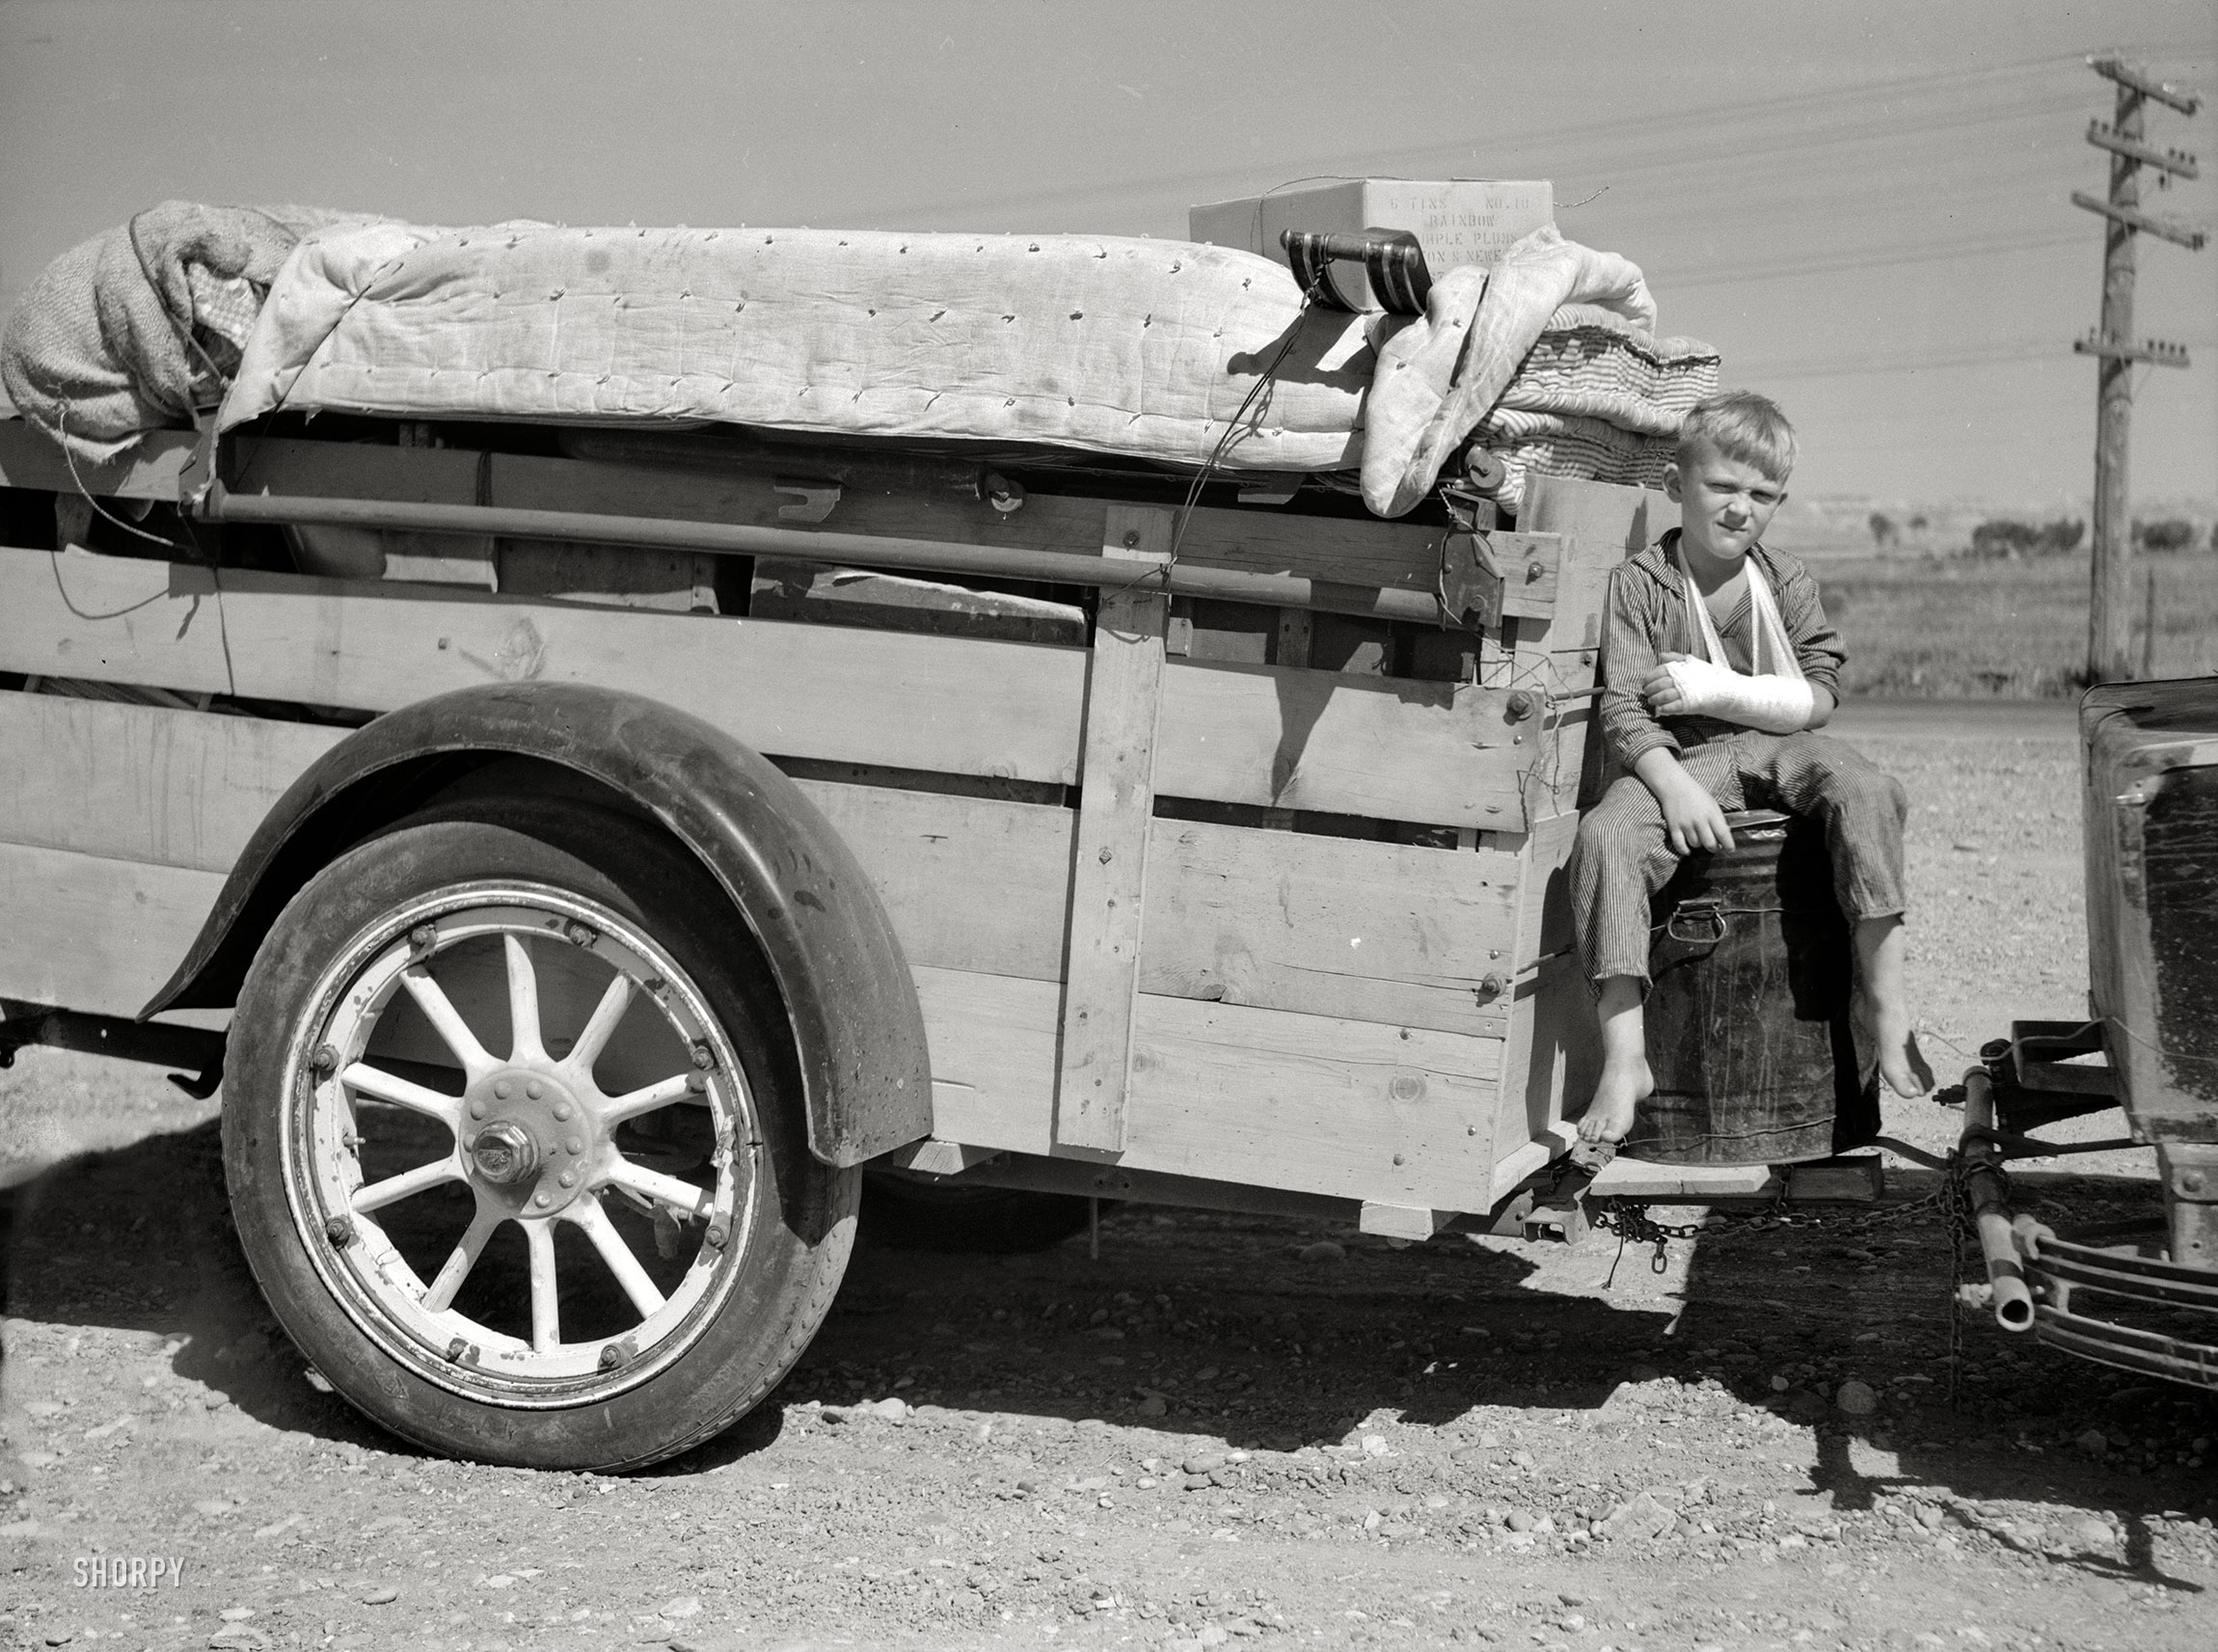 July 1936. "Drought refugees from North Dakota in Montana." The lad last seen here getting a drink. 3¼ x 4¼ negative by Arthur Rothstein. View full size.